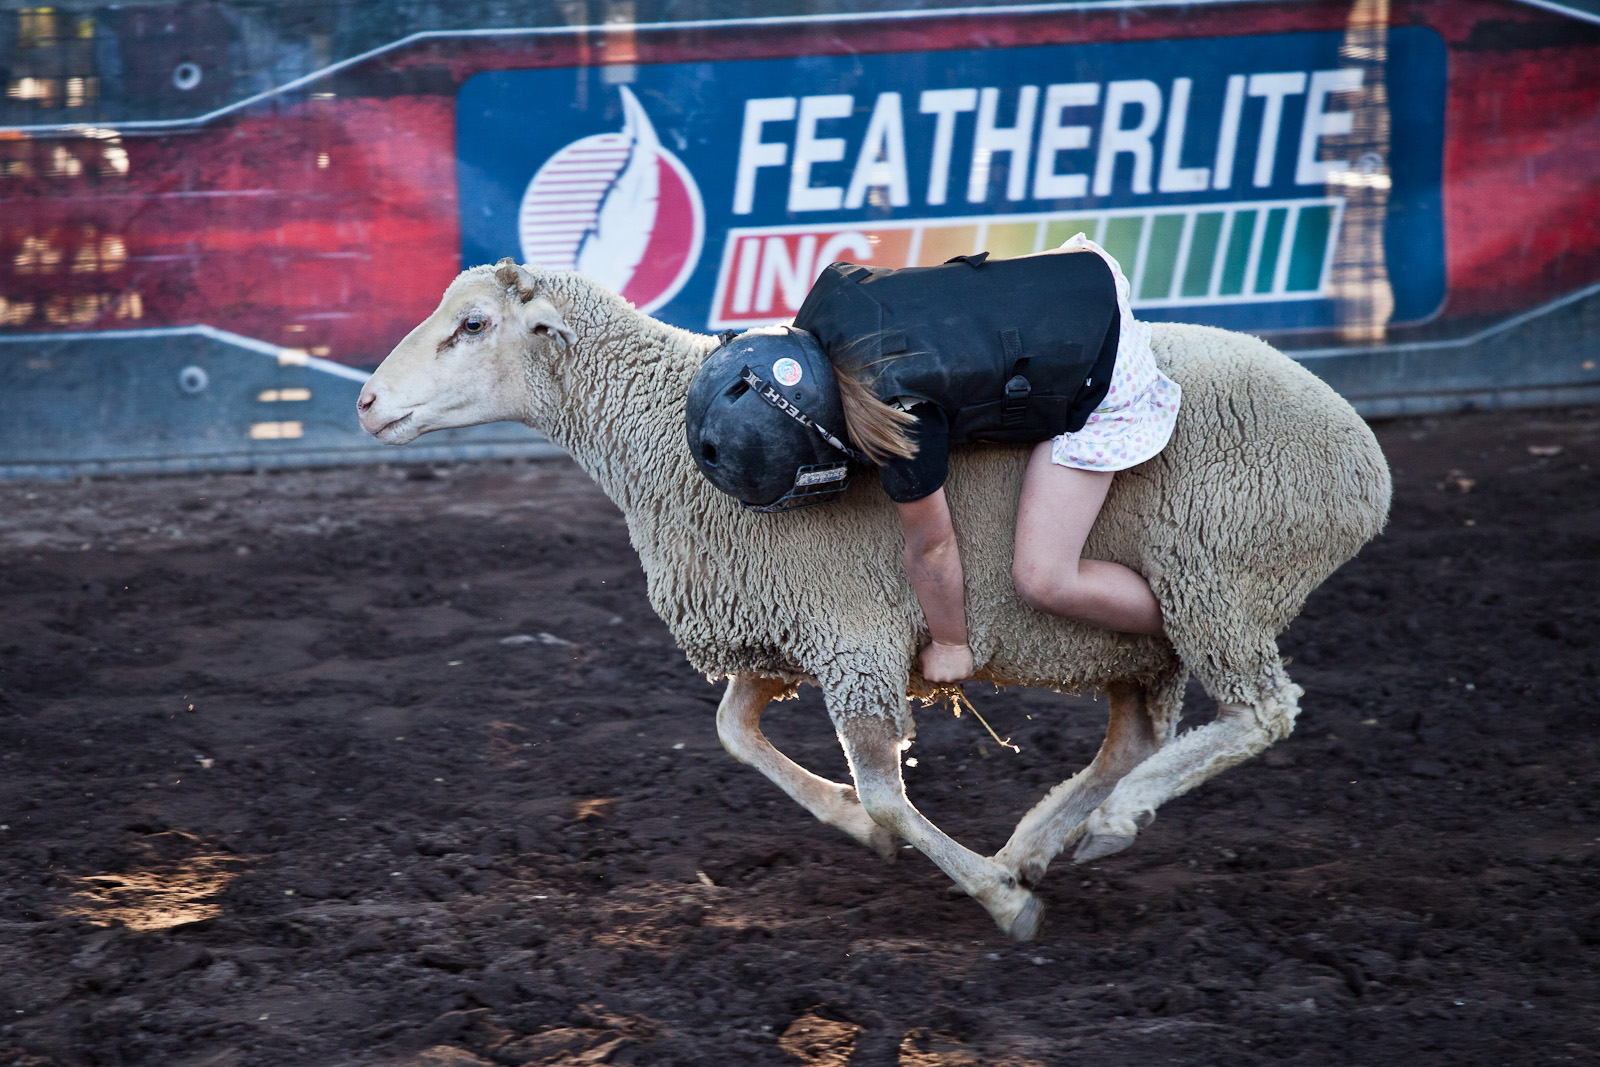 Little Girl Hangs on in Sheep Riding Rodeo at Alameda County Fair